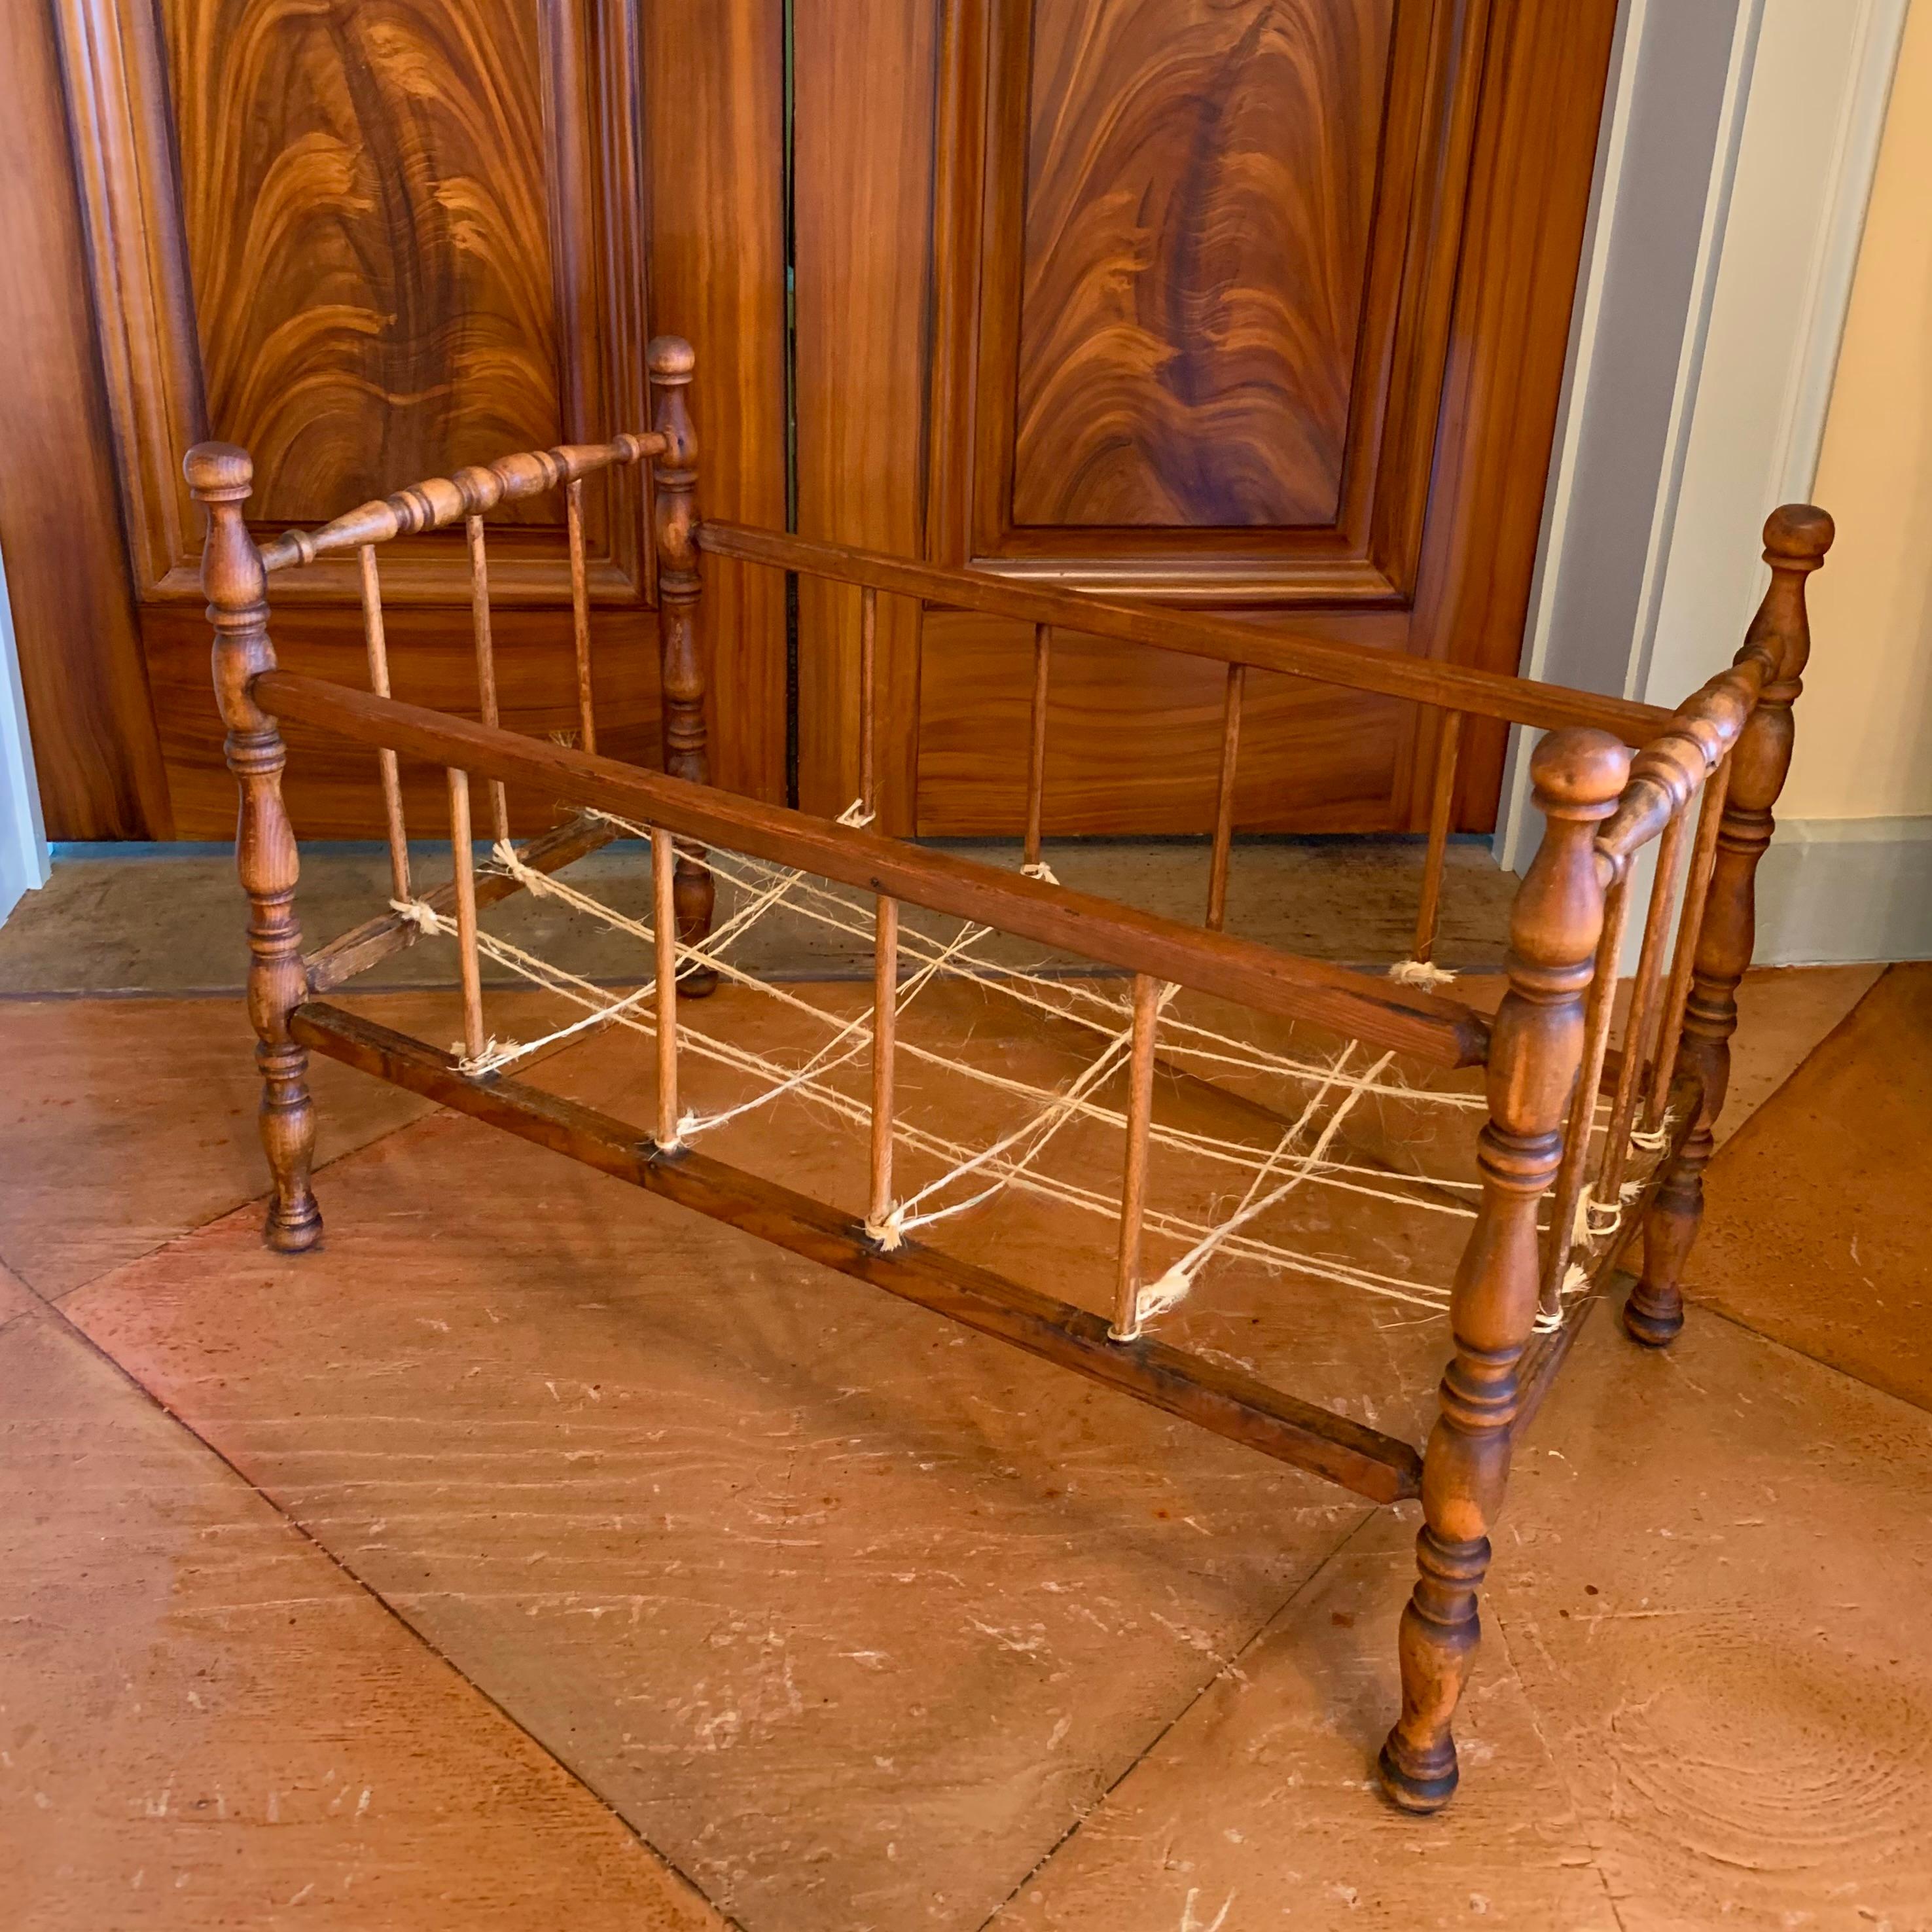 A mid 19th century maple and pine turned wood doll’s bed of nice proportions, with detailed turnings on the four bed posts. The bottom is 